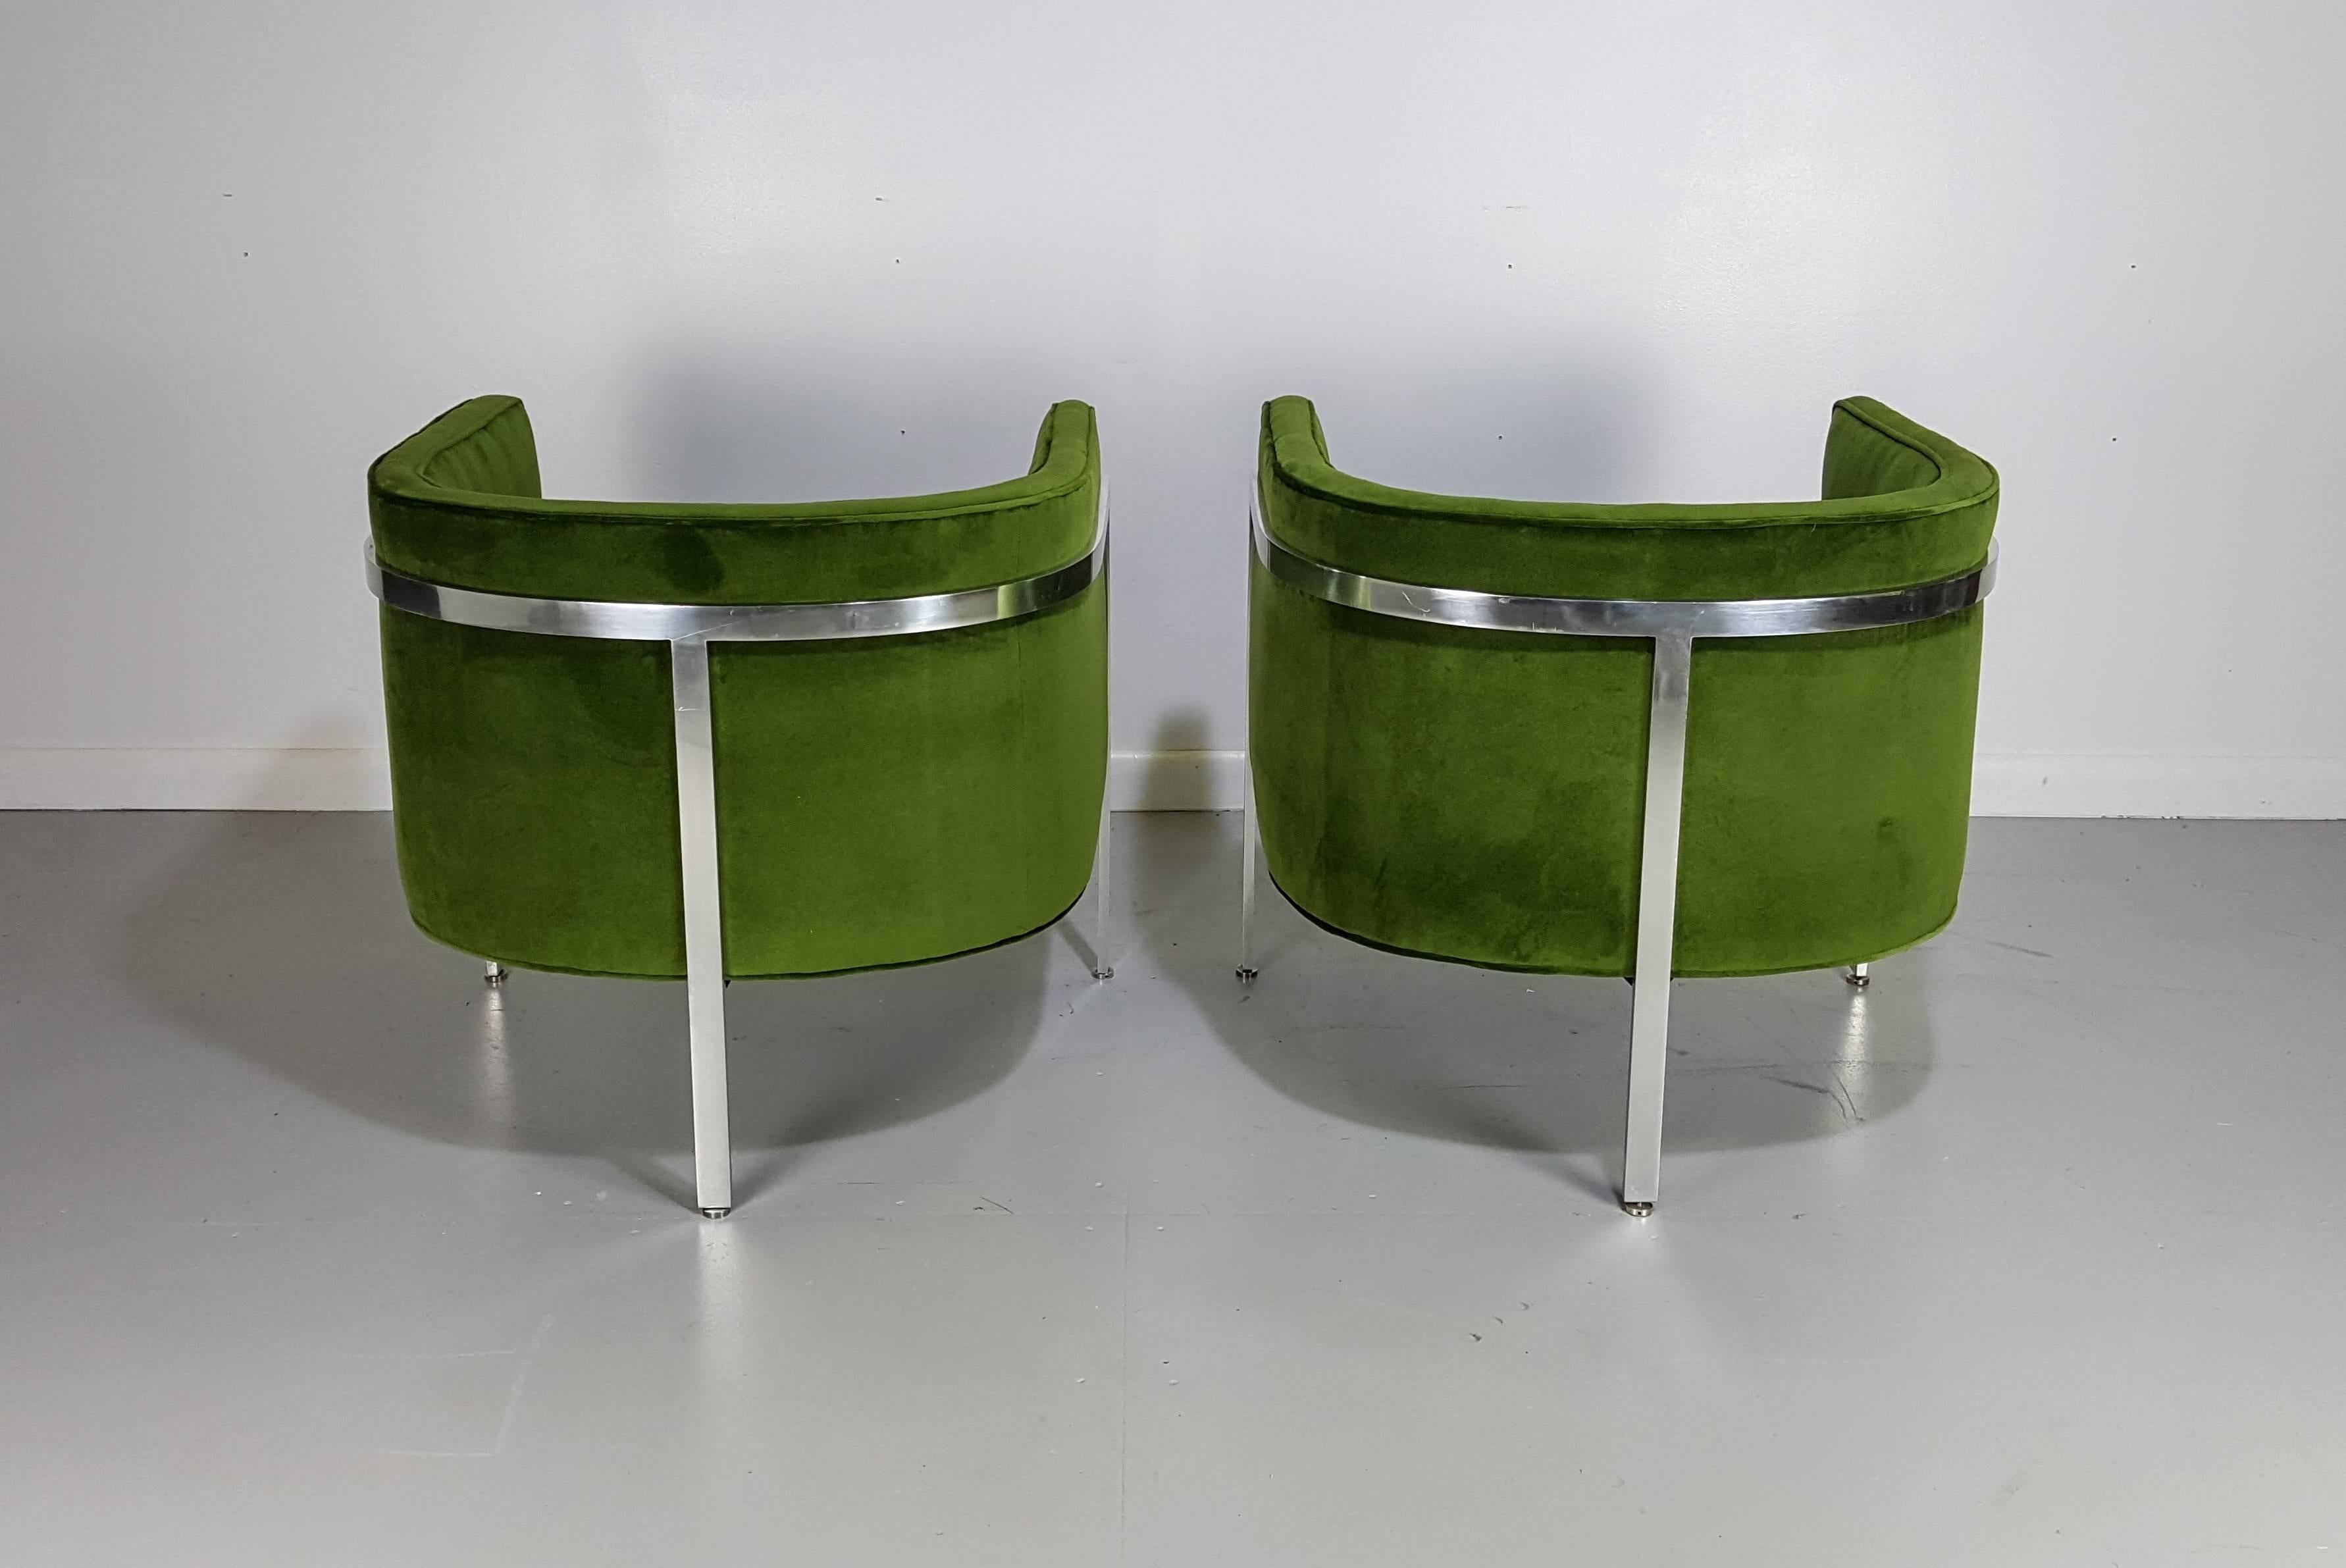 Chrome and velvet lounge chairs by Harvey Probber, 1960s. Amazing design and super comfortable. Fabric and foam are new. Chrome frames have normal wear for age.

See this item in our private NYC showroom! Refine Limited is located in the heart of